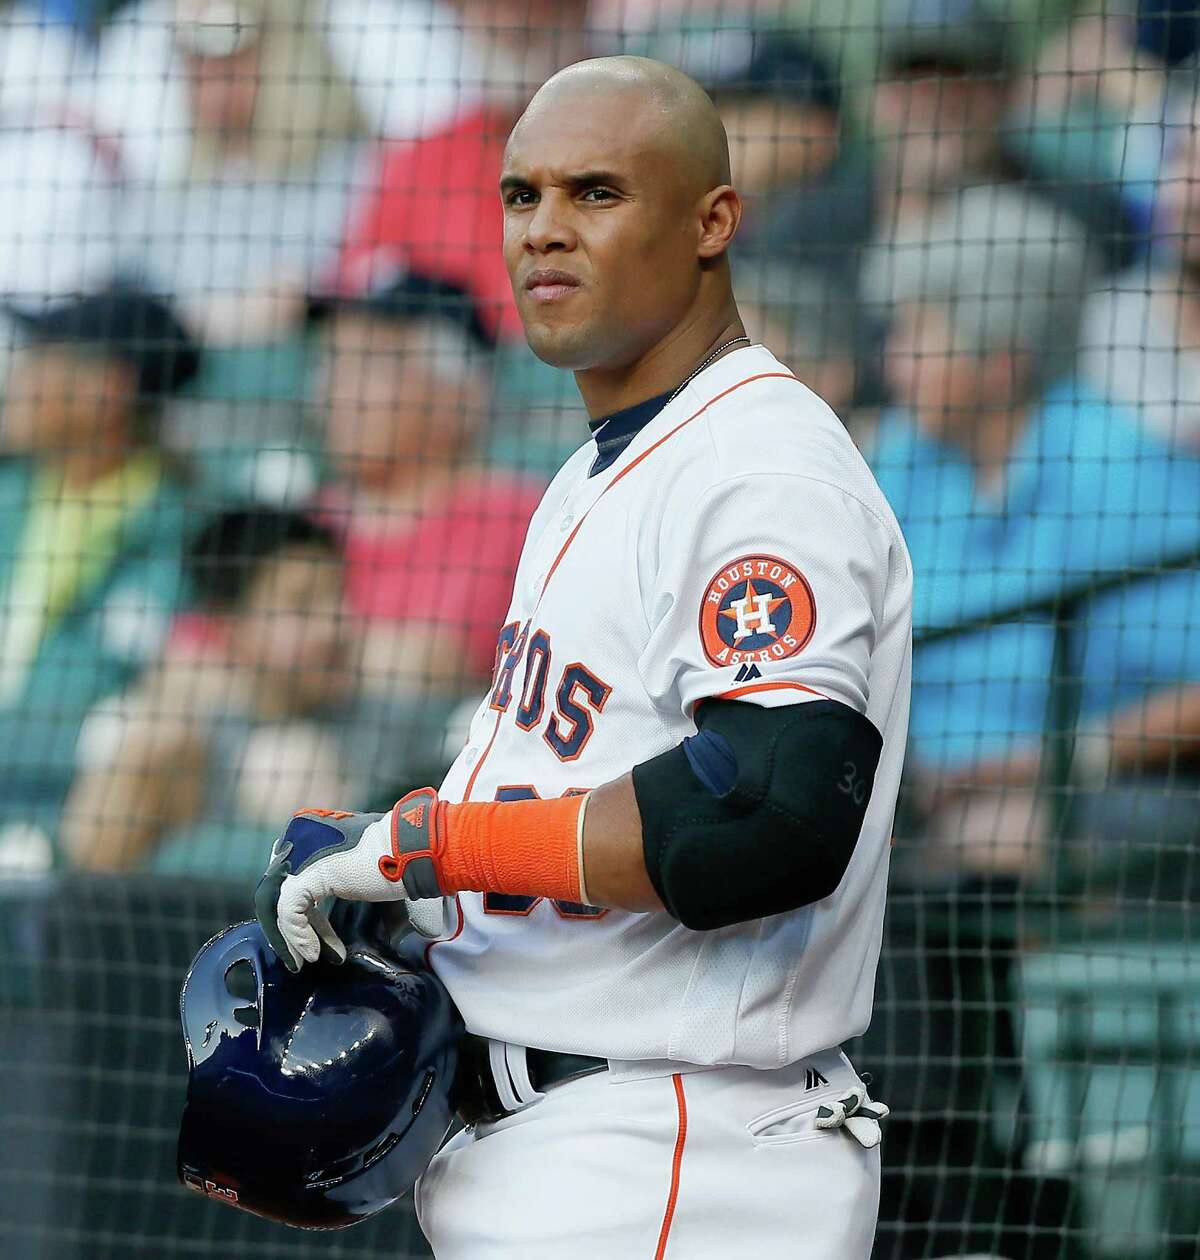 HOUSTON, TX - MAY 07: Carlos Gomez #30 of the Houston Astros waits on deck in the fifth inning on May 07, 2016 in Houston, Texas. (Photo by Bob Levey/Getty Images)